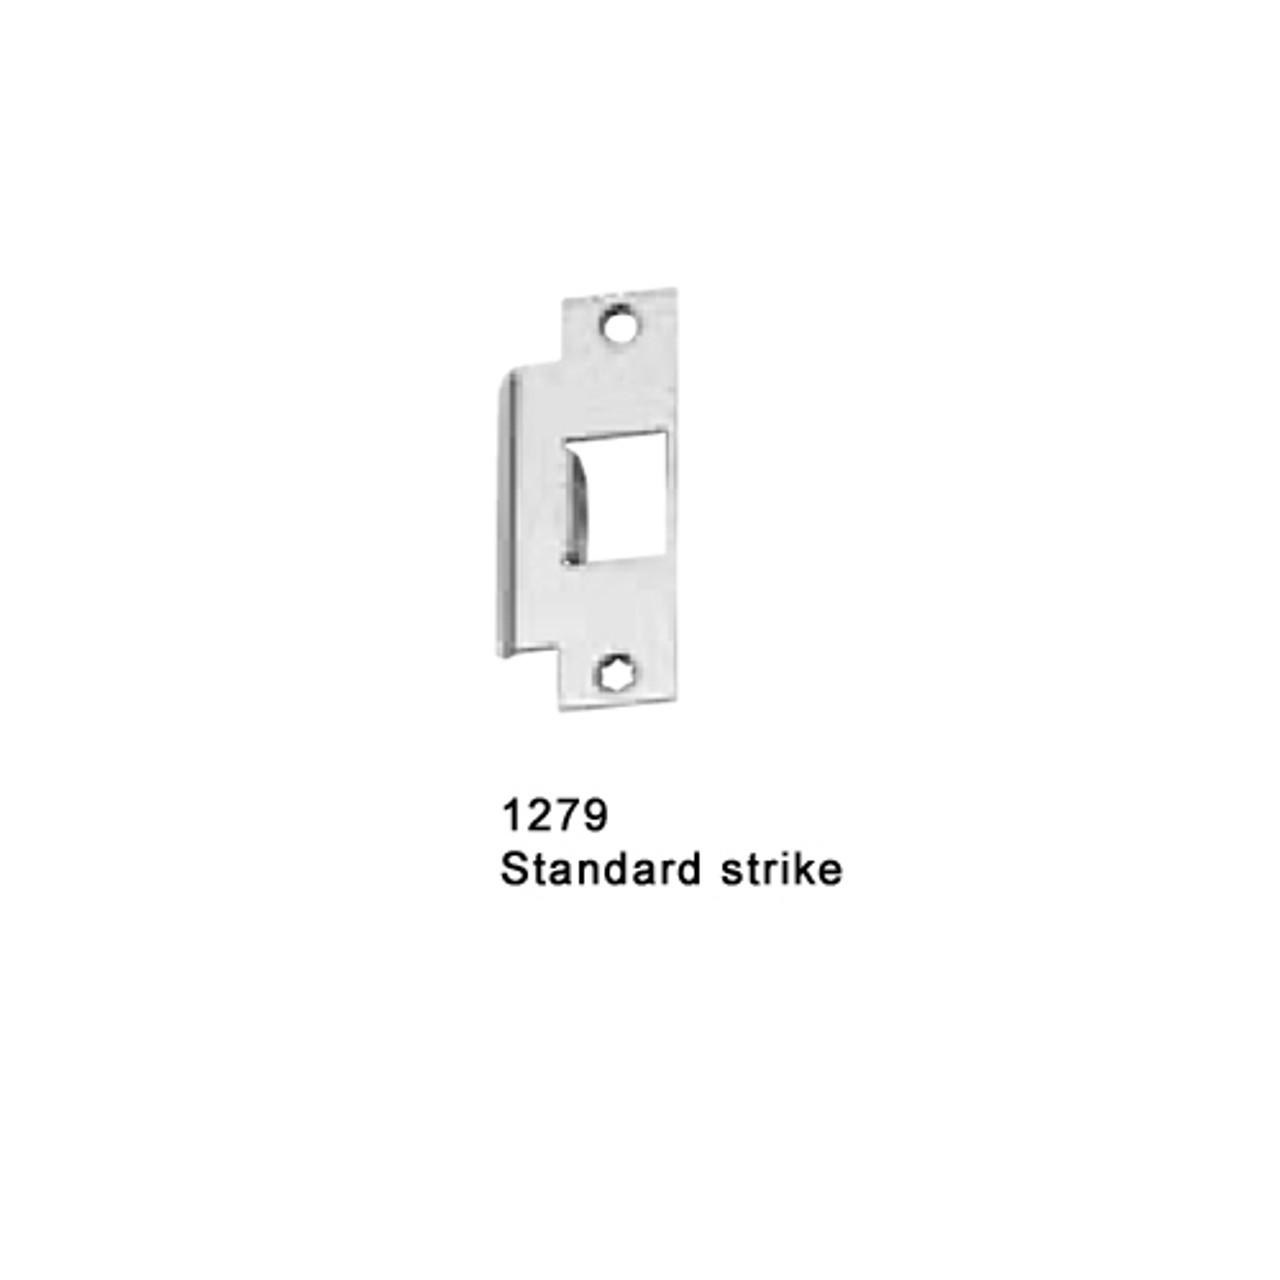 F-25-M-L-BE-Dane-US10-4-RHR Falcon 25 Series Fire Rated Mortise Lock Devices 510L-BE Dane Lever Trim with Blank Escutcheon in Satin Bronze